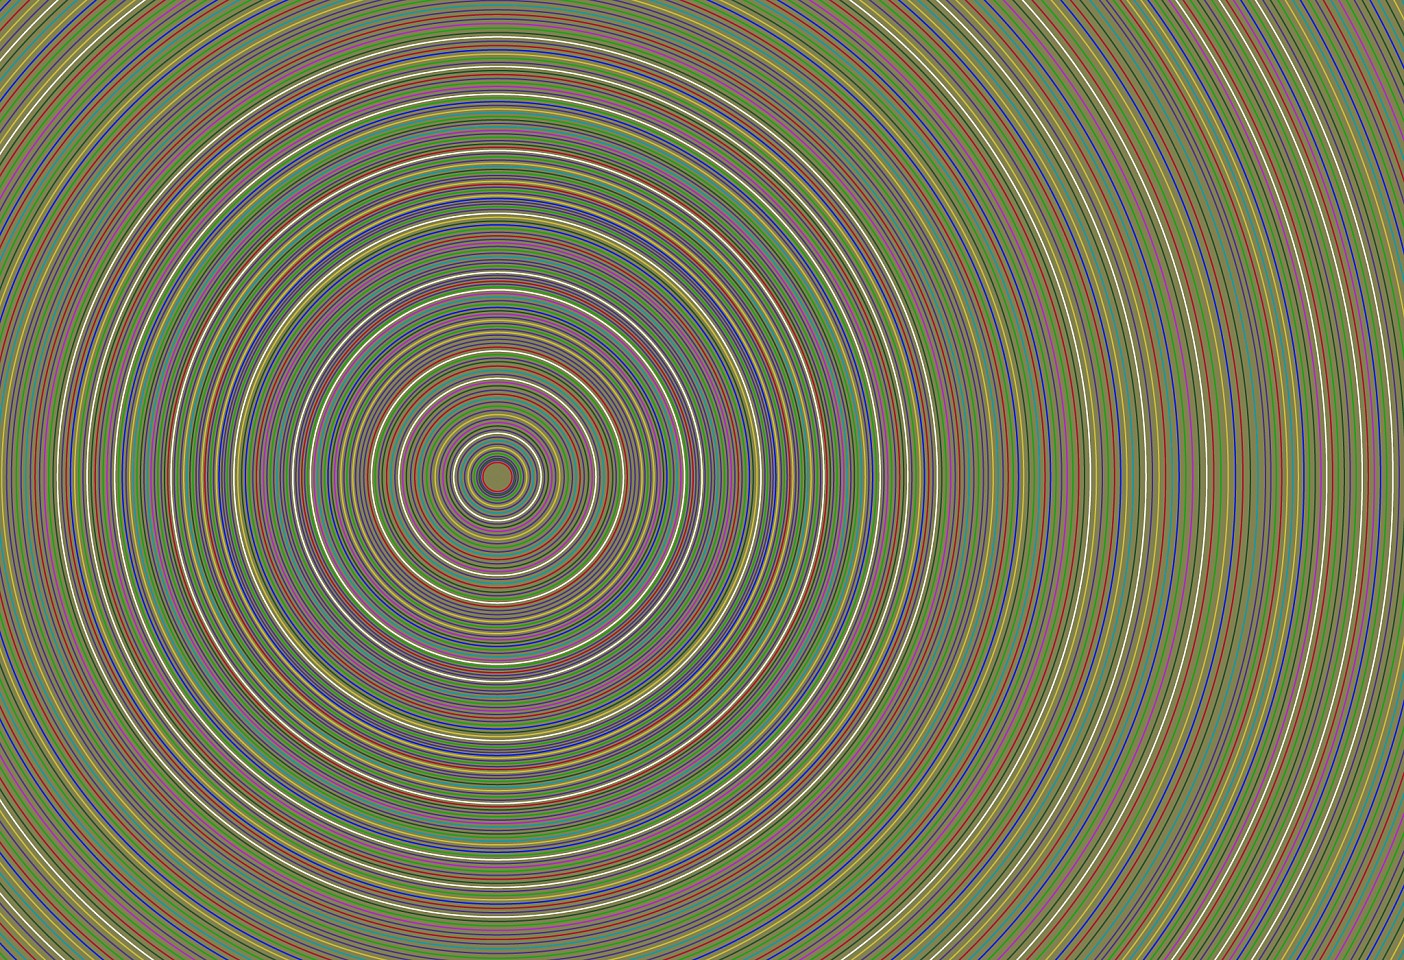 Dane Albert, Circles #40 Multi-Color Dusk, 2023
Acrylic on canvas (Concept), 48 x 72 in. (121.9 x 182.9 cm)
Series of colored lines and shapes in multiple configurations
DA.2023-040-multicolor-dusk